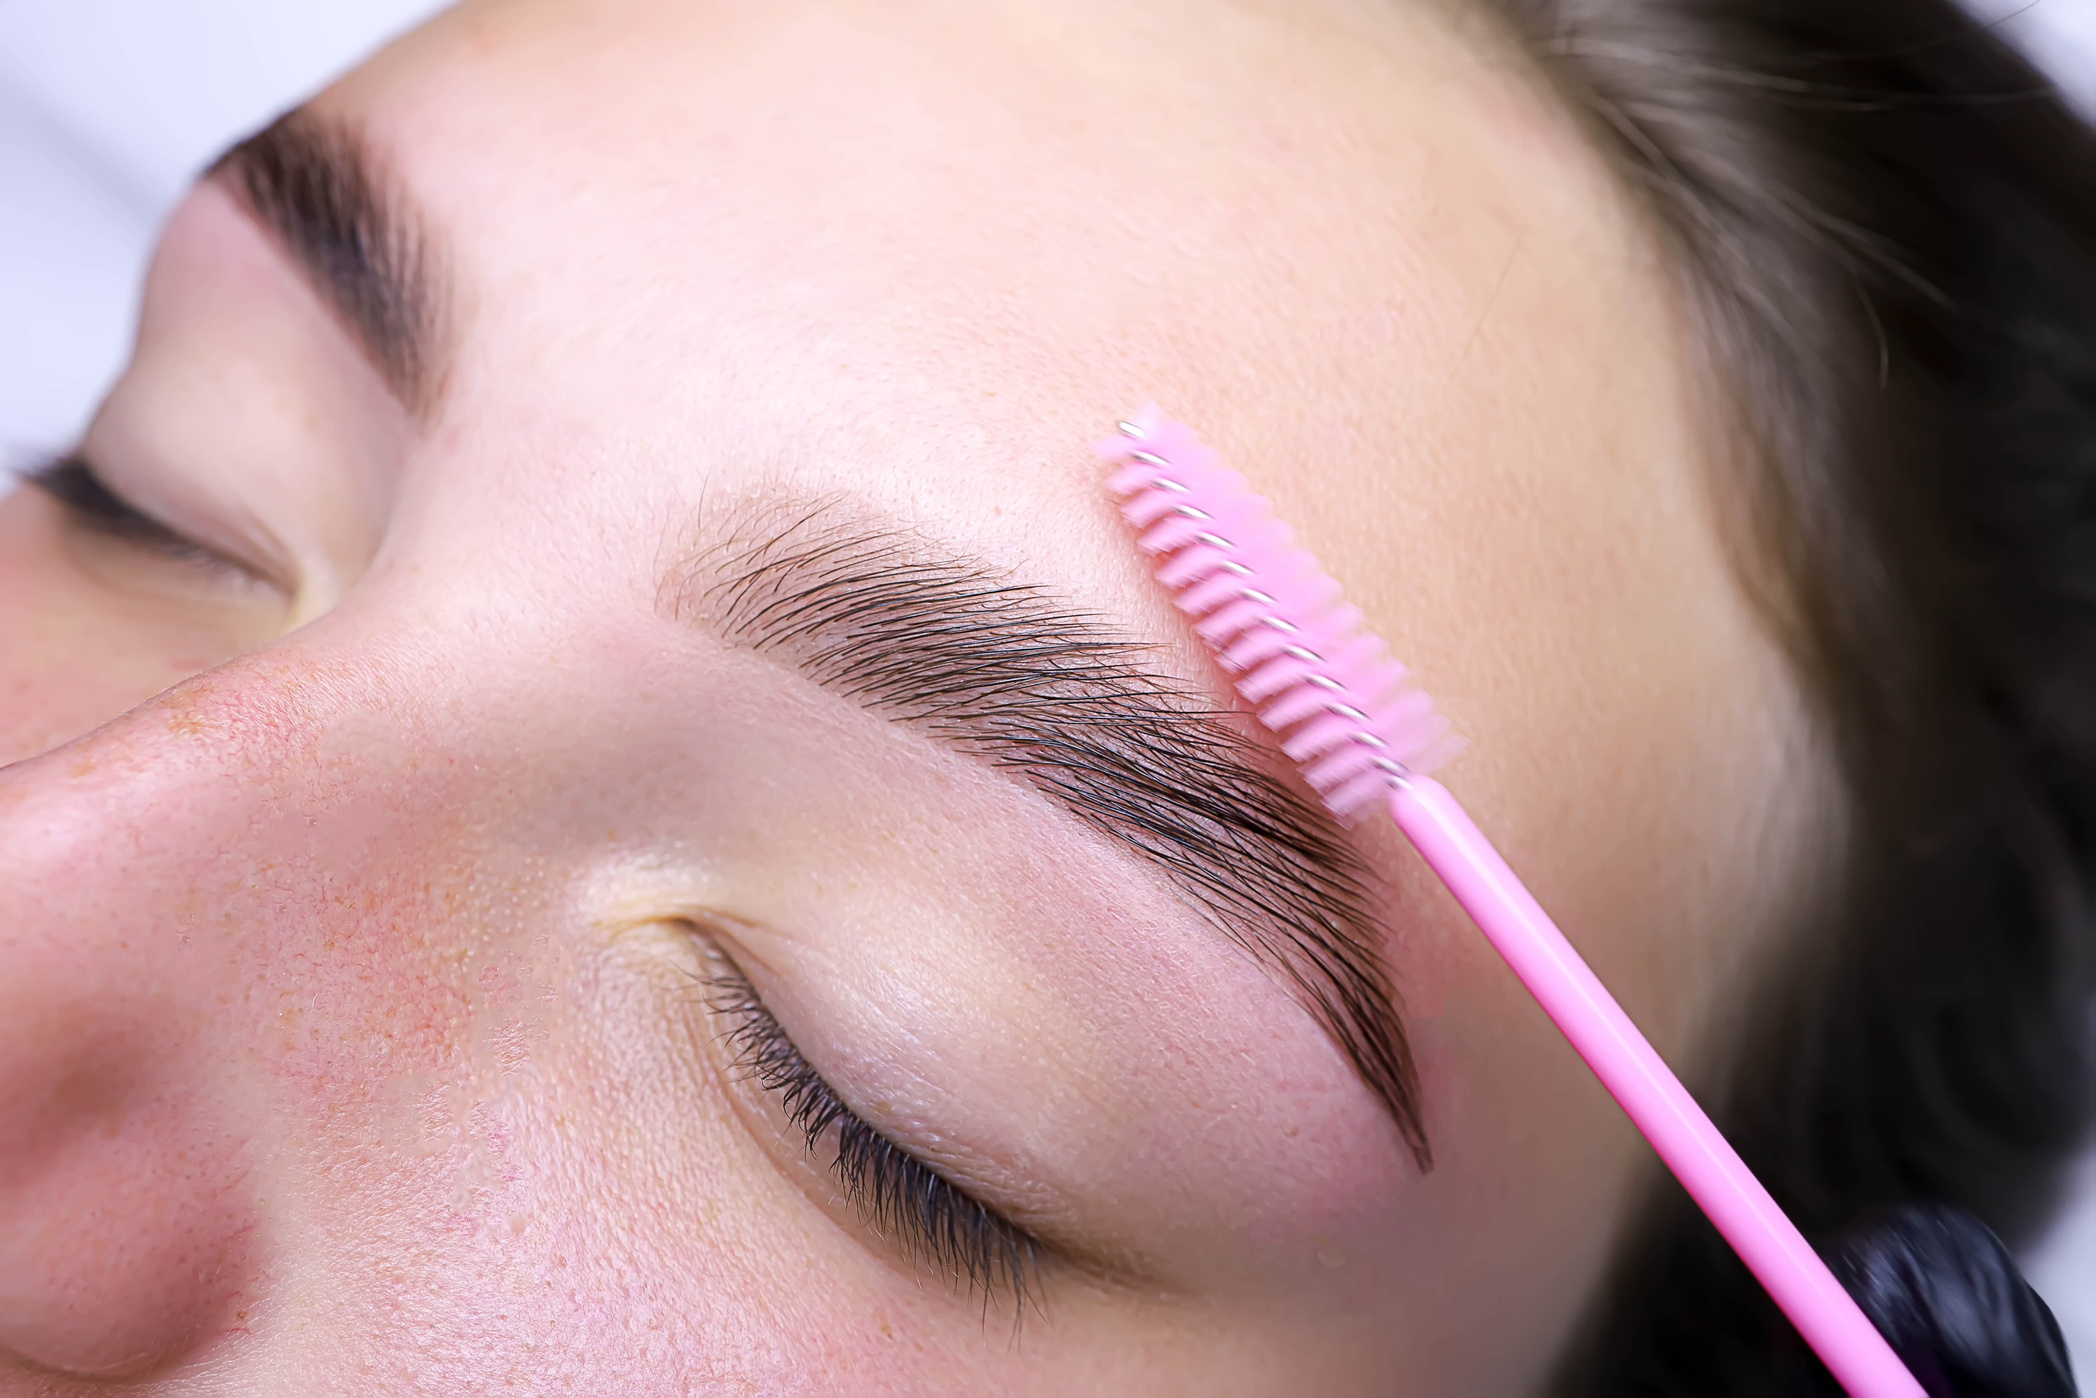 combing the hairs in the eyebrows with a brush after the pro